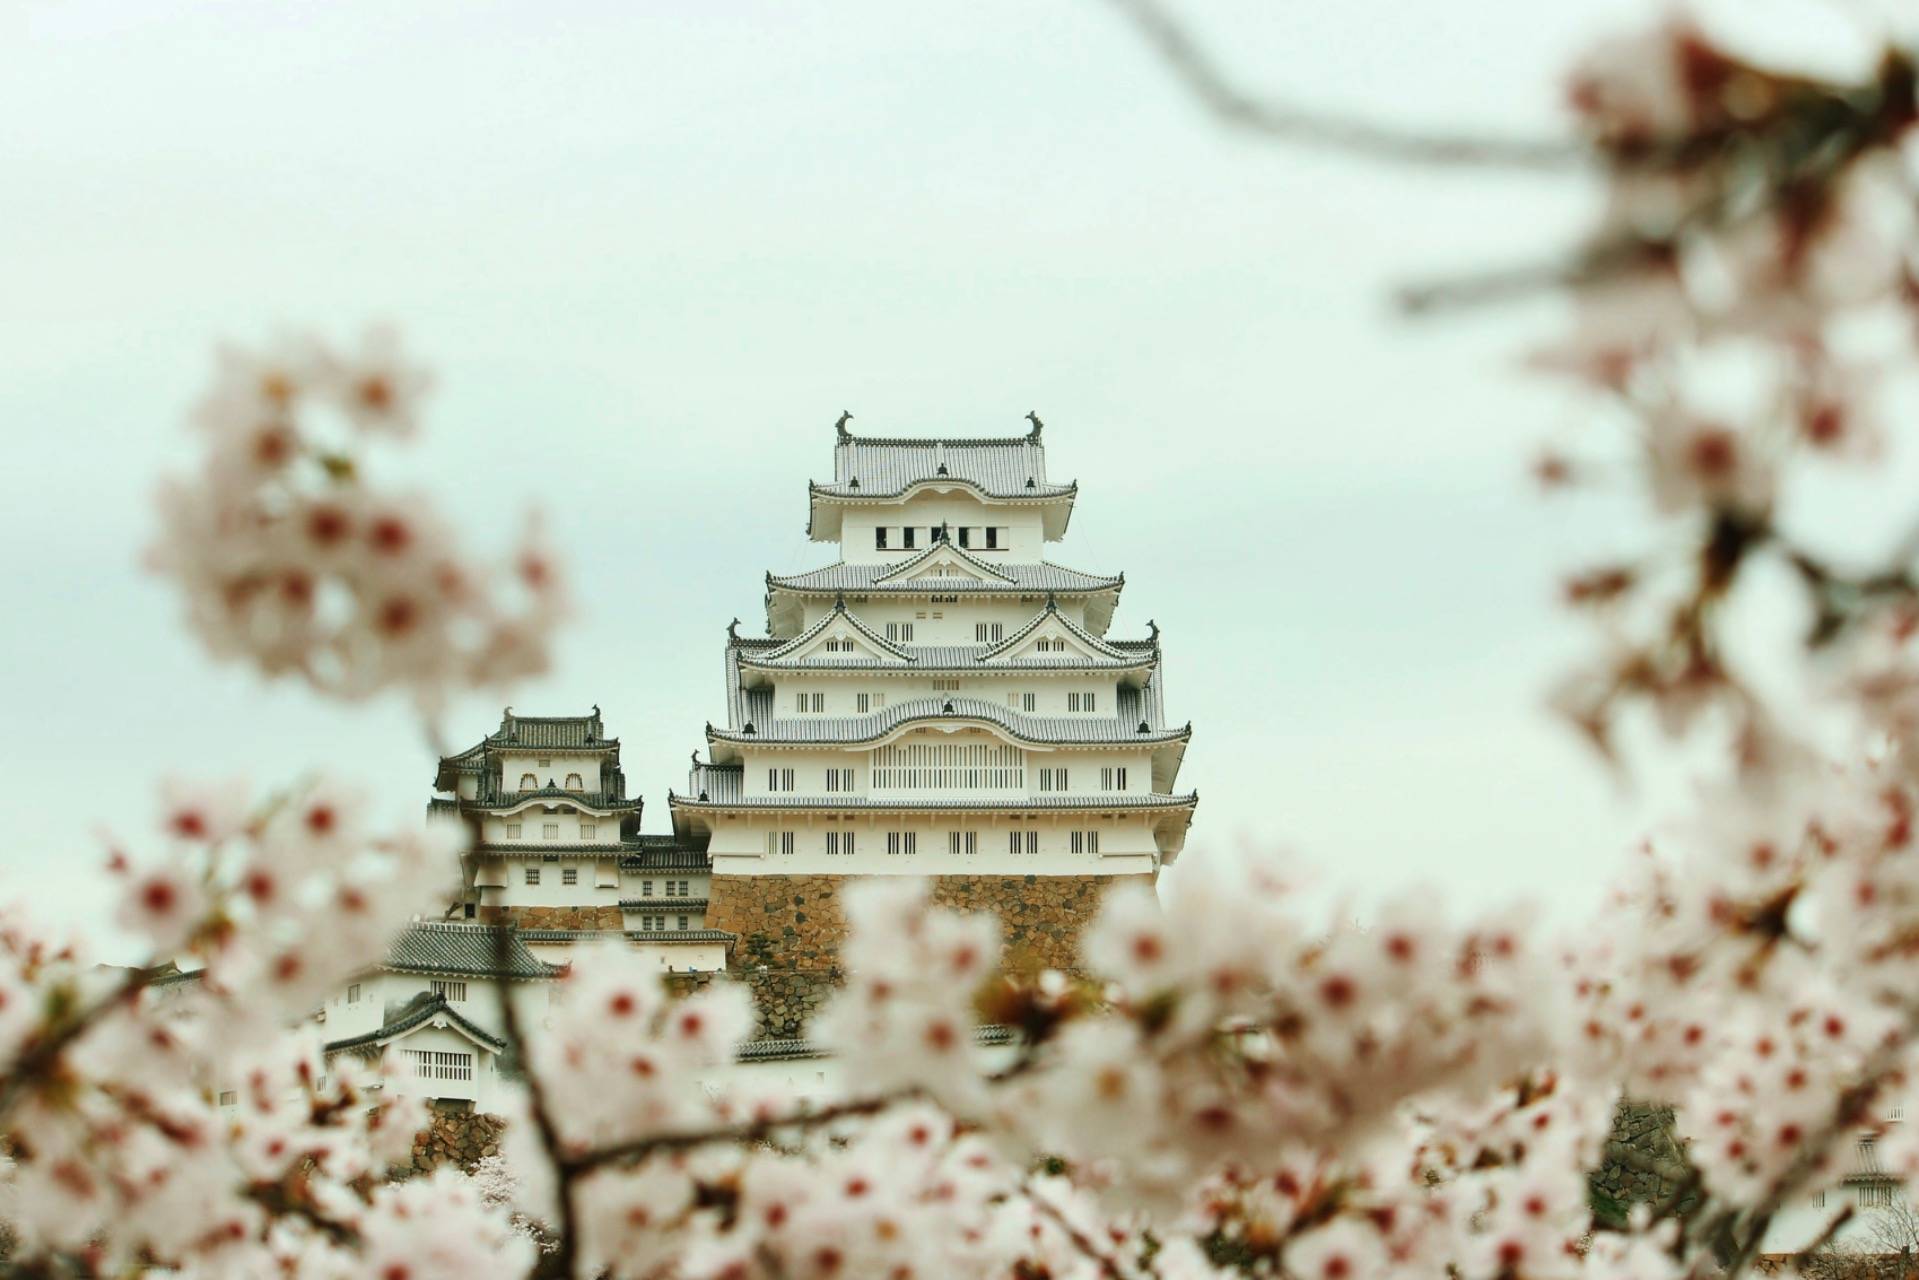 Viewing Cherry Blossoms At Himeji Castle